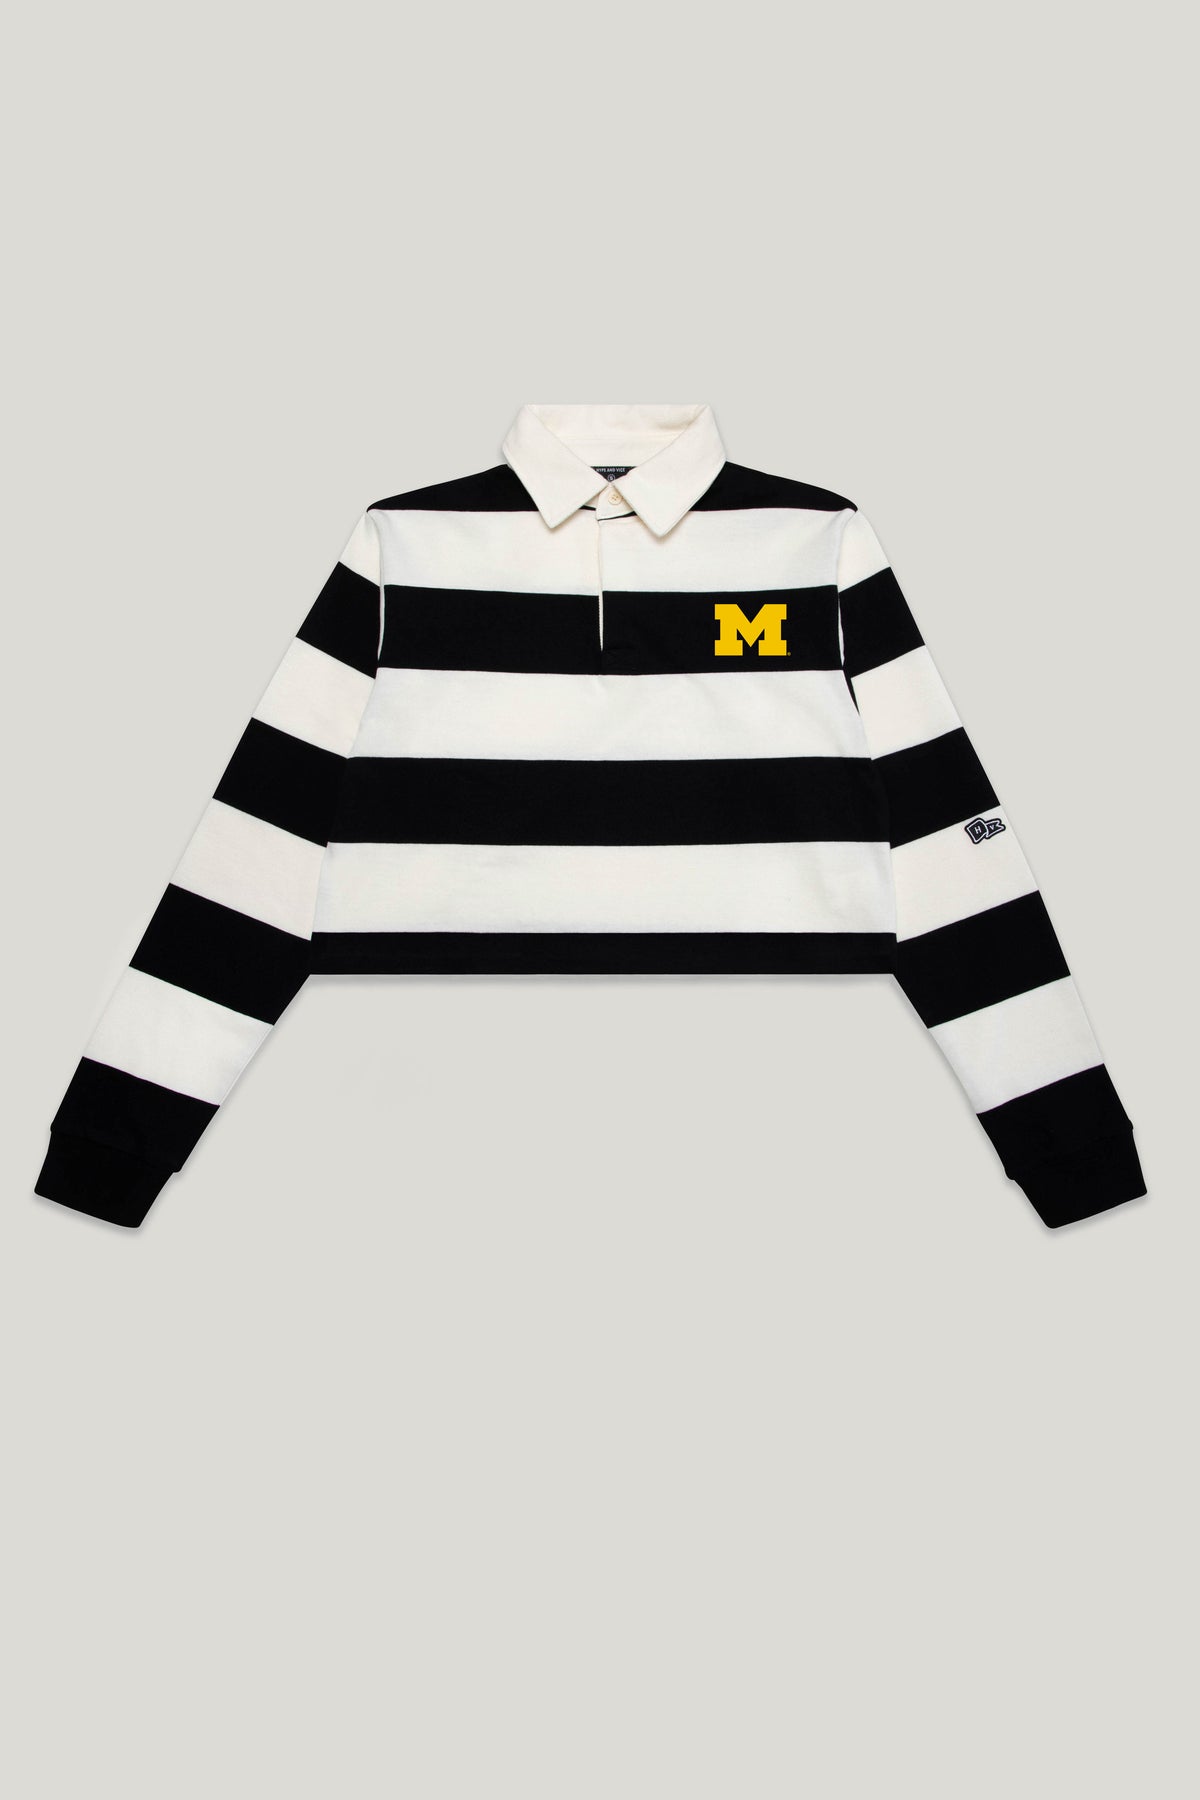 University of Michigan Rugby Top